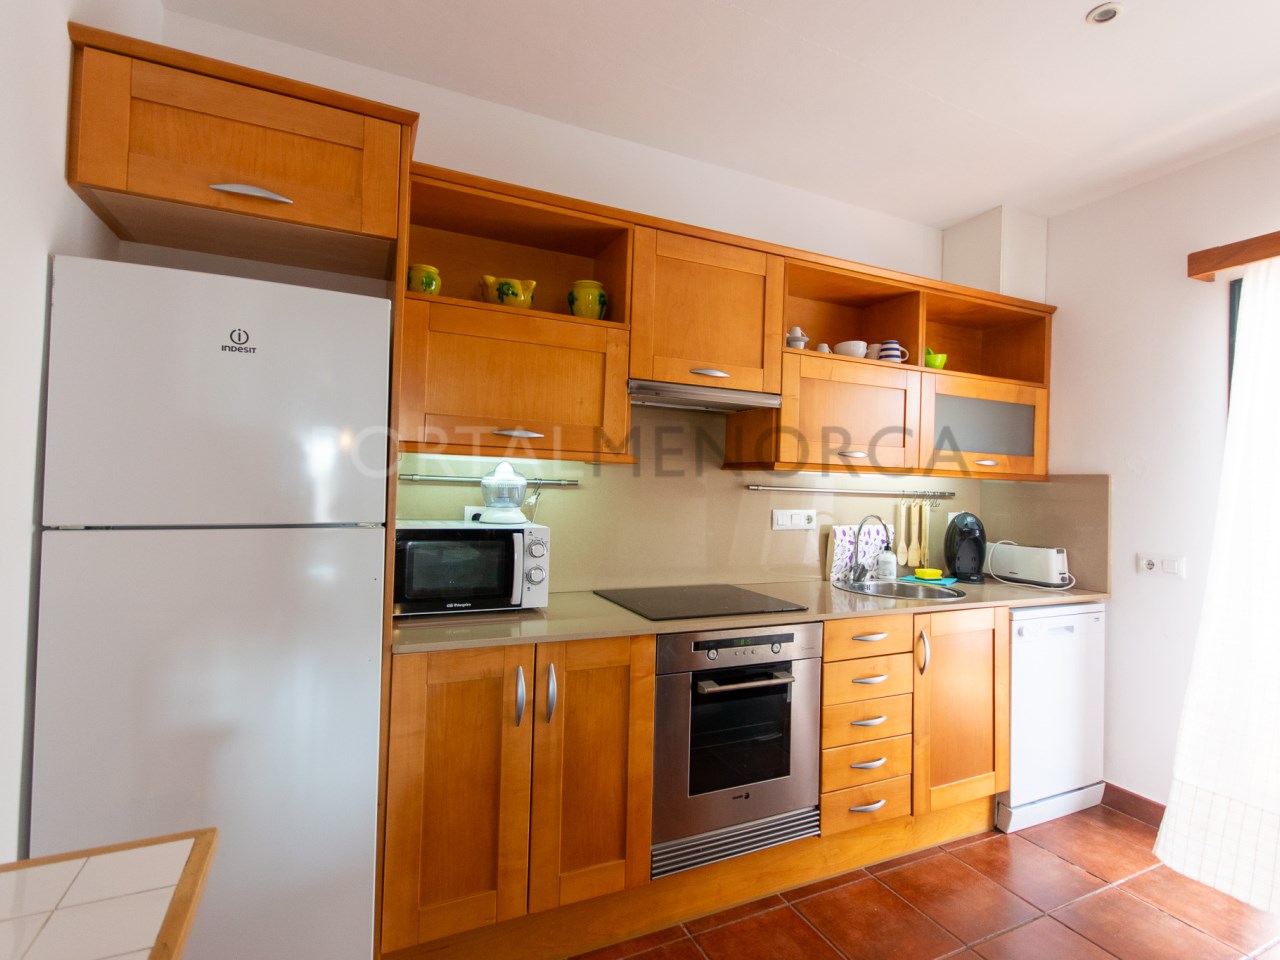 Kitchen of a villa with tourist license for sale in Cala n Bosch